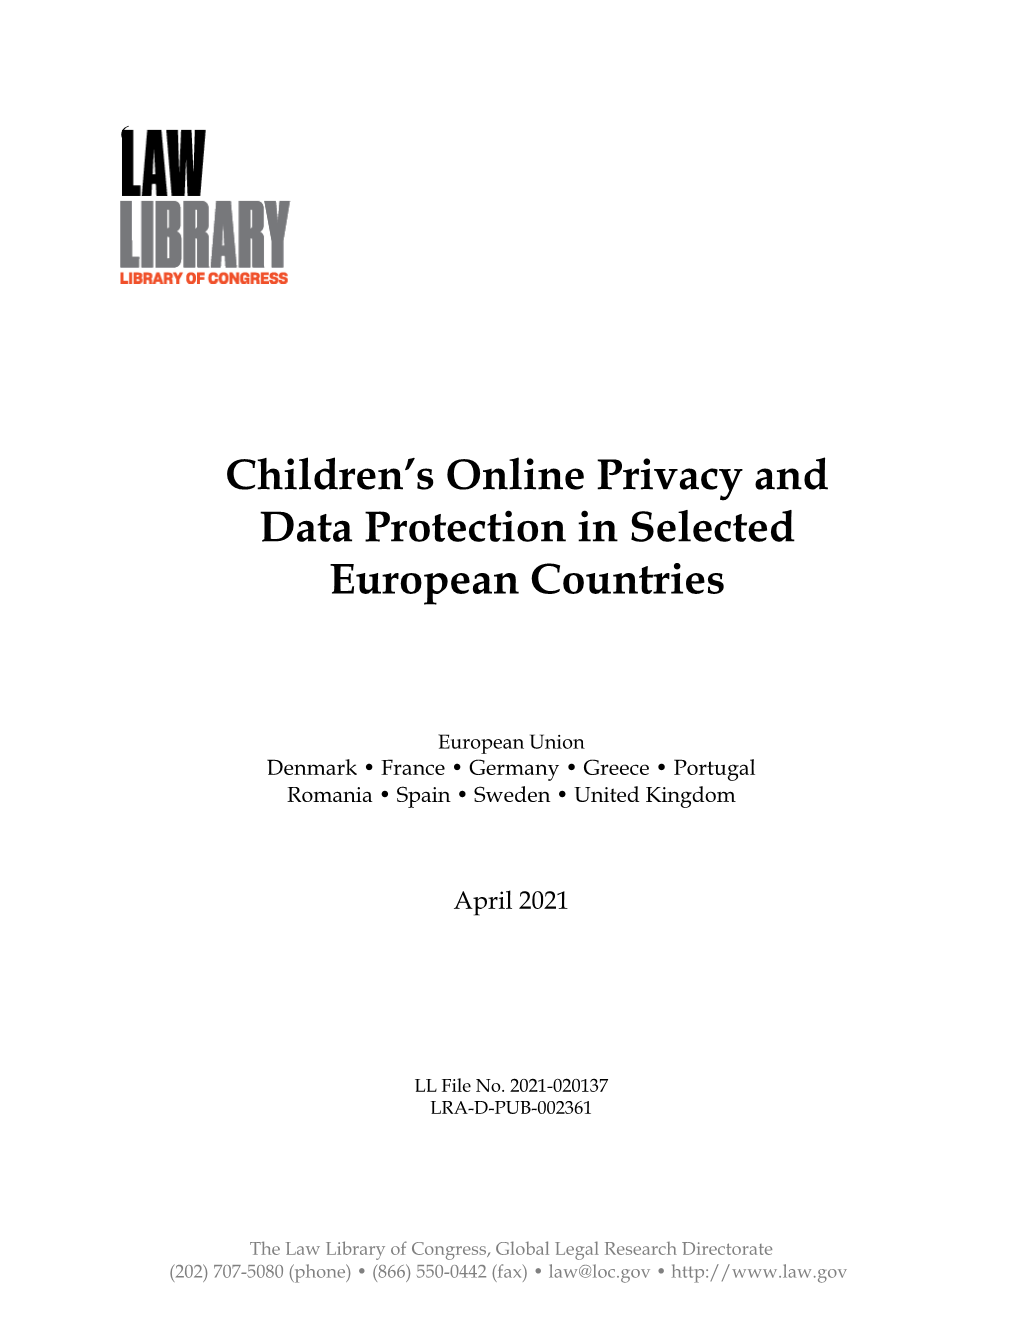 Children's Online Privacy and Data Protection in Selected European